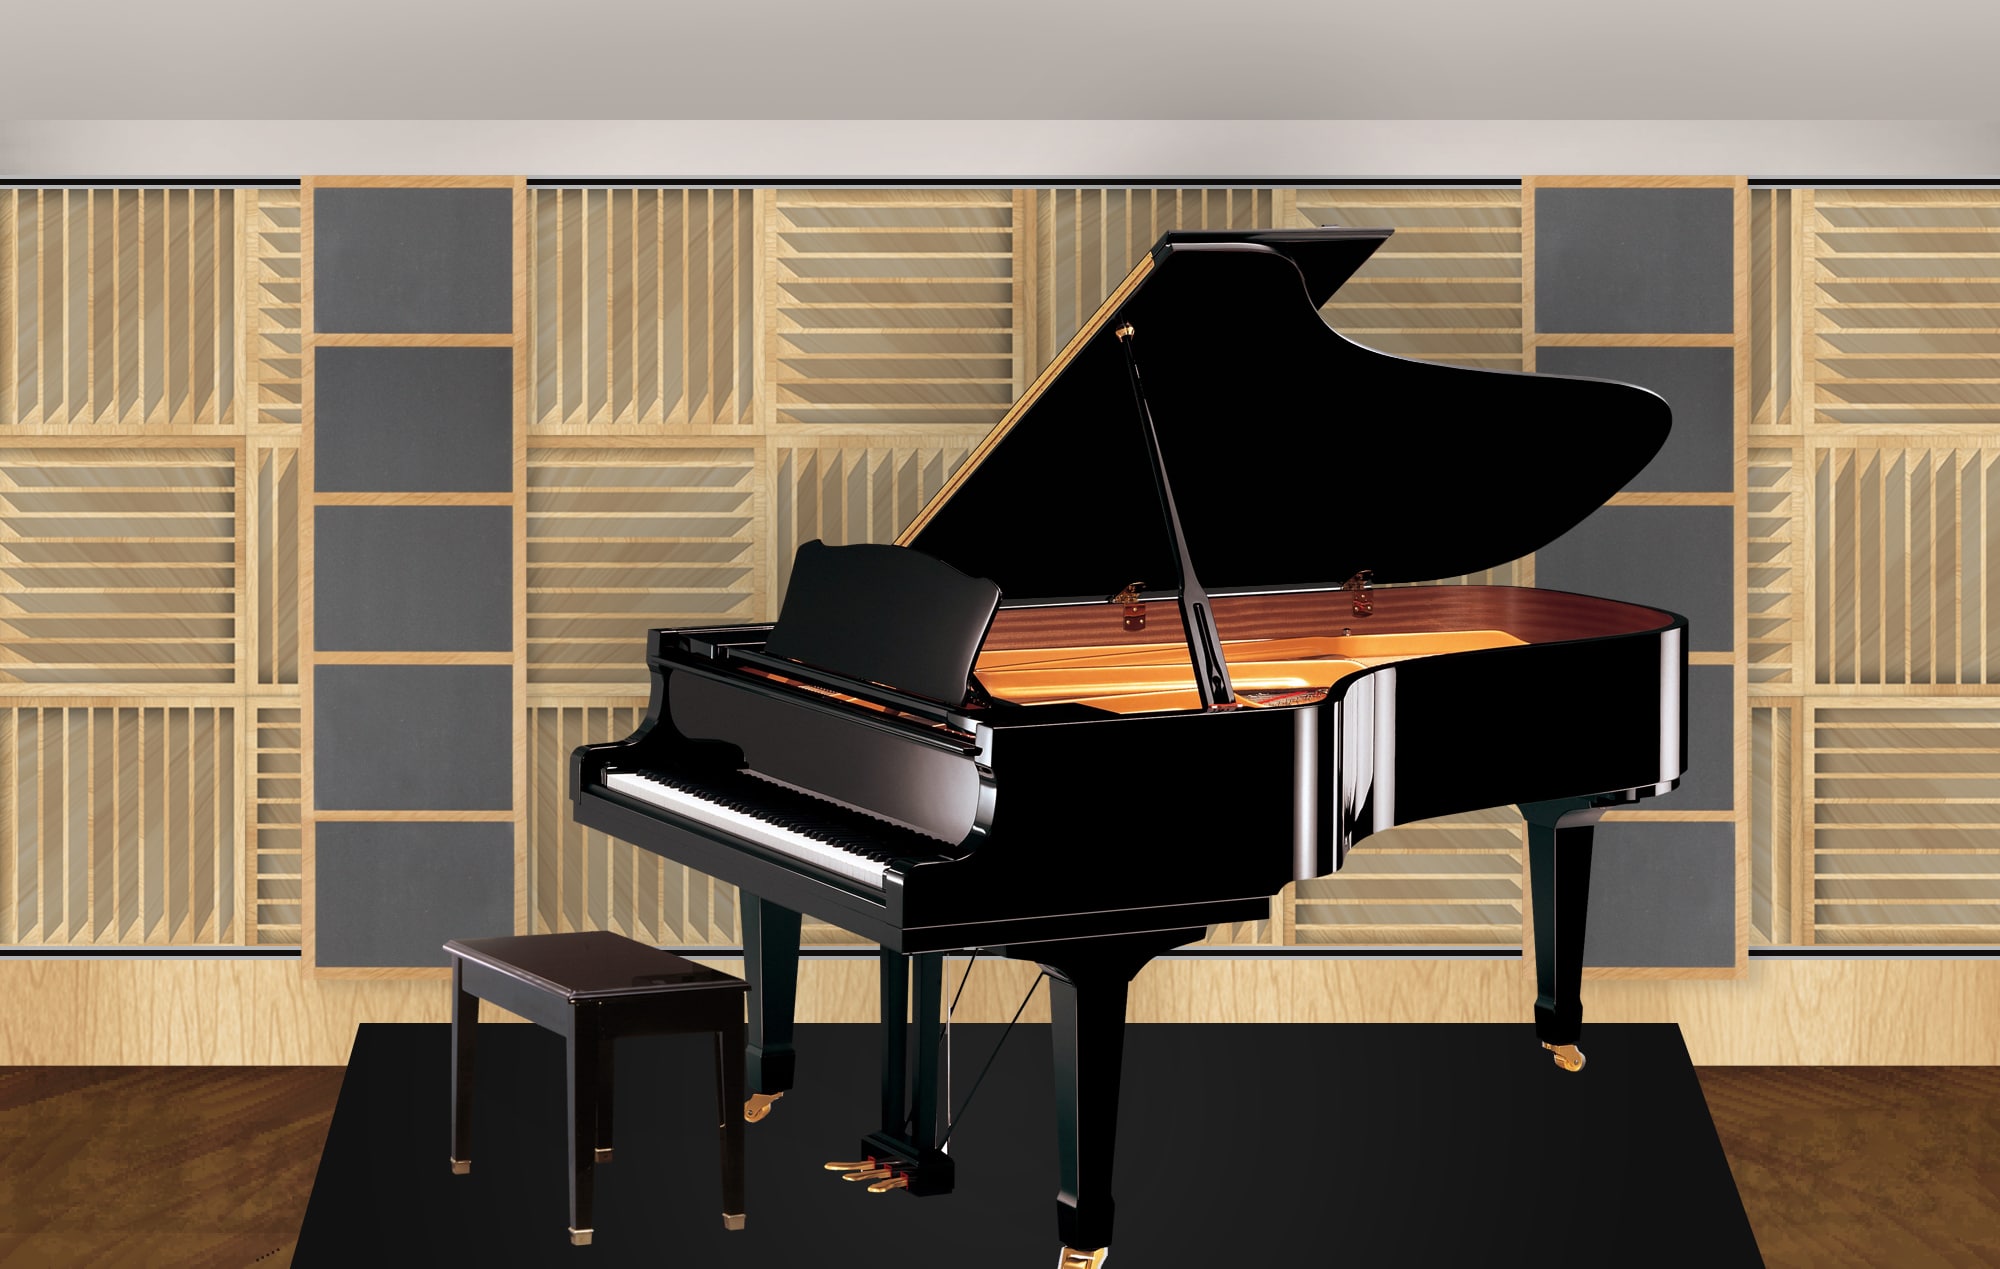 Acoustic Treatment For A Piano Room – What Do You Recommend?